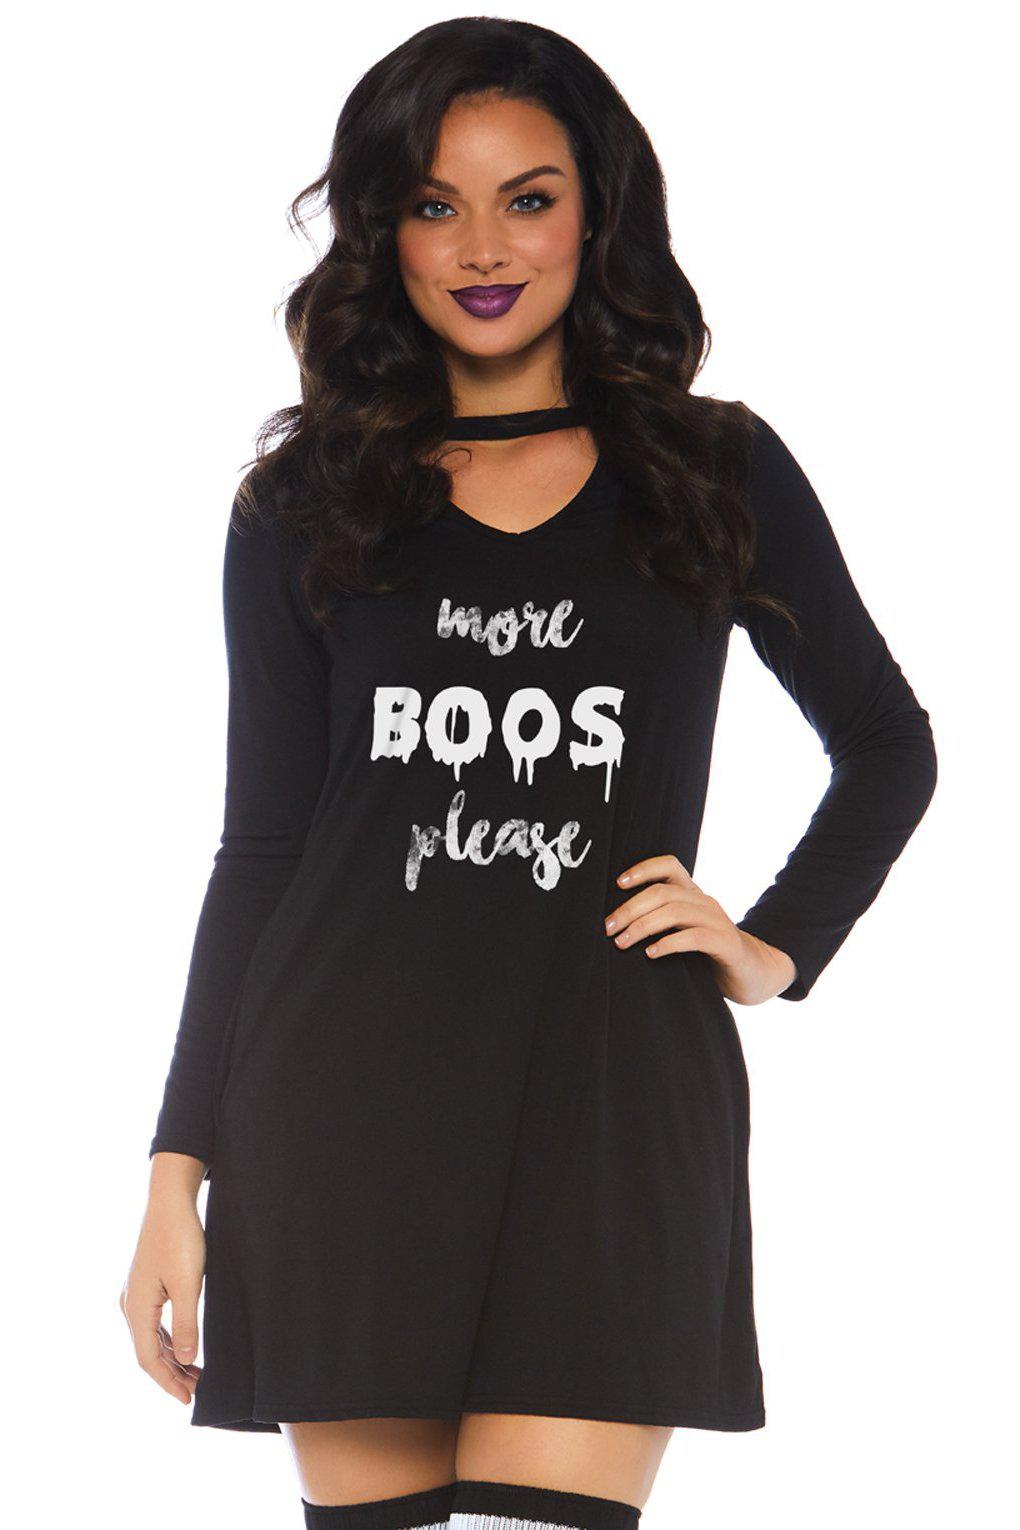 More Boos Jersey Dress-Other Costumes-Leg Avenue-Black-S-SEXYSHOES.COM